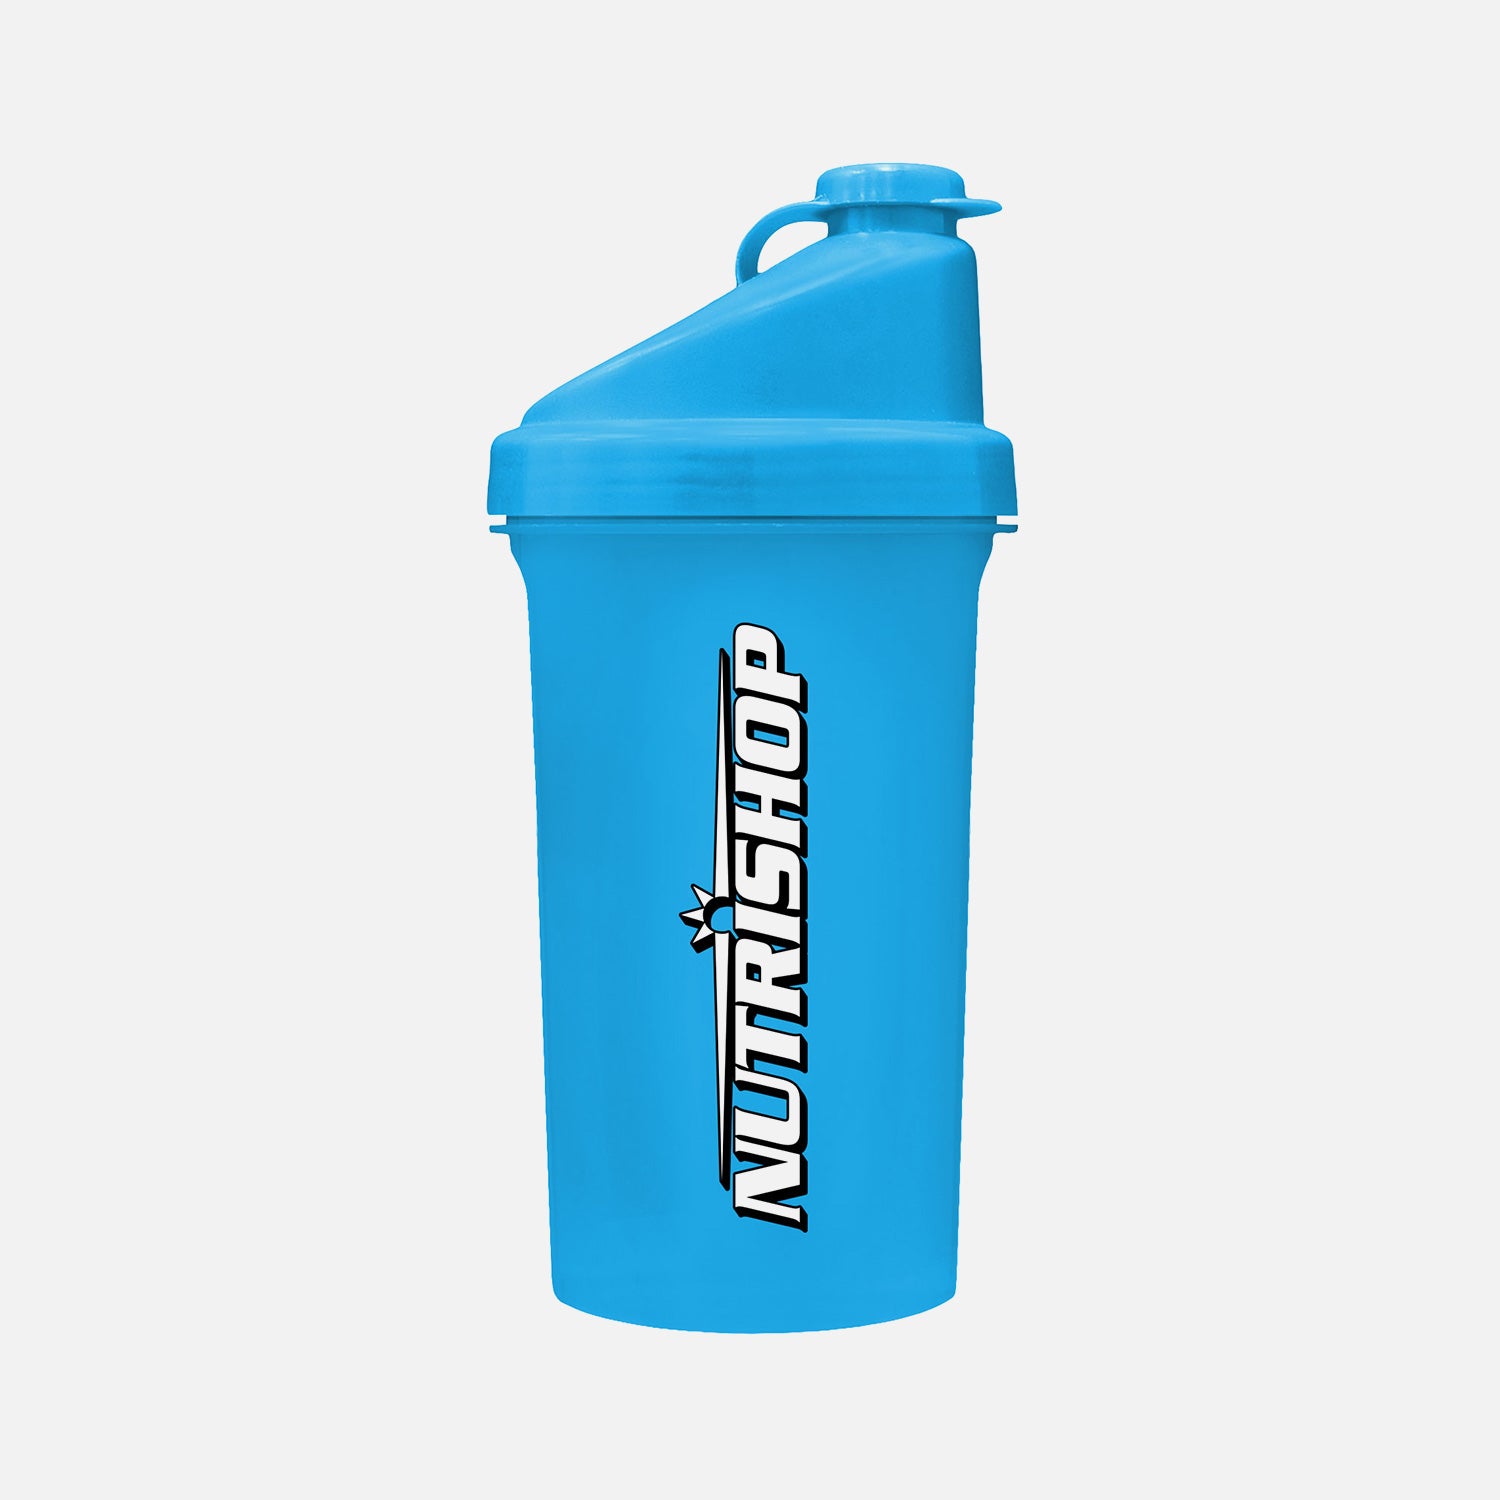 TeamUnico Protein Shaker Cups